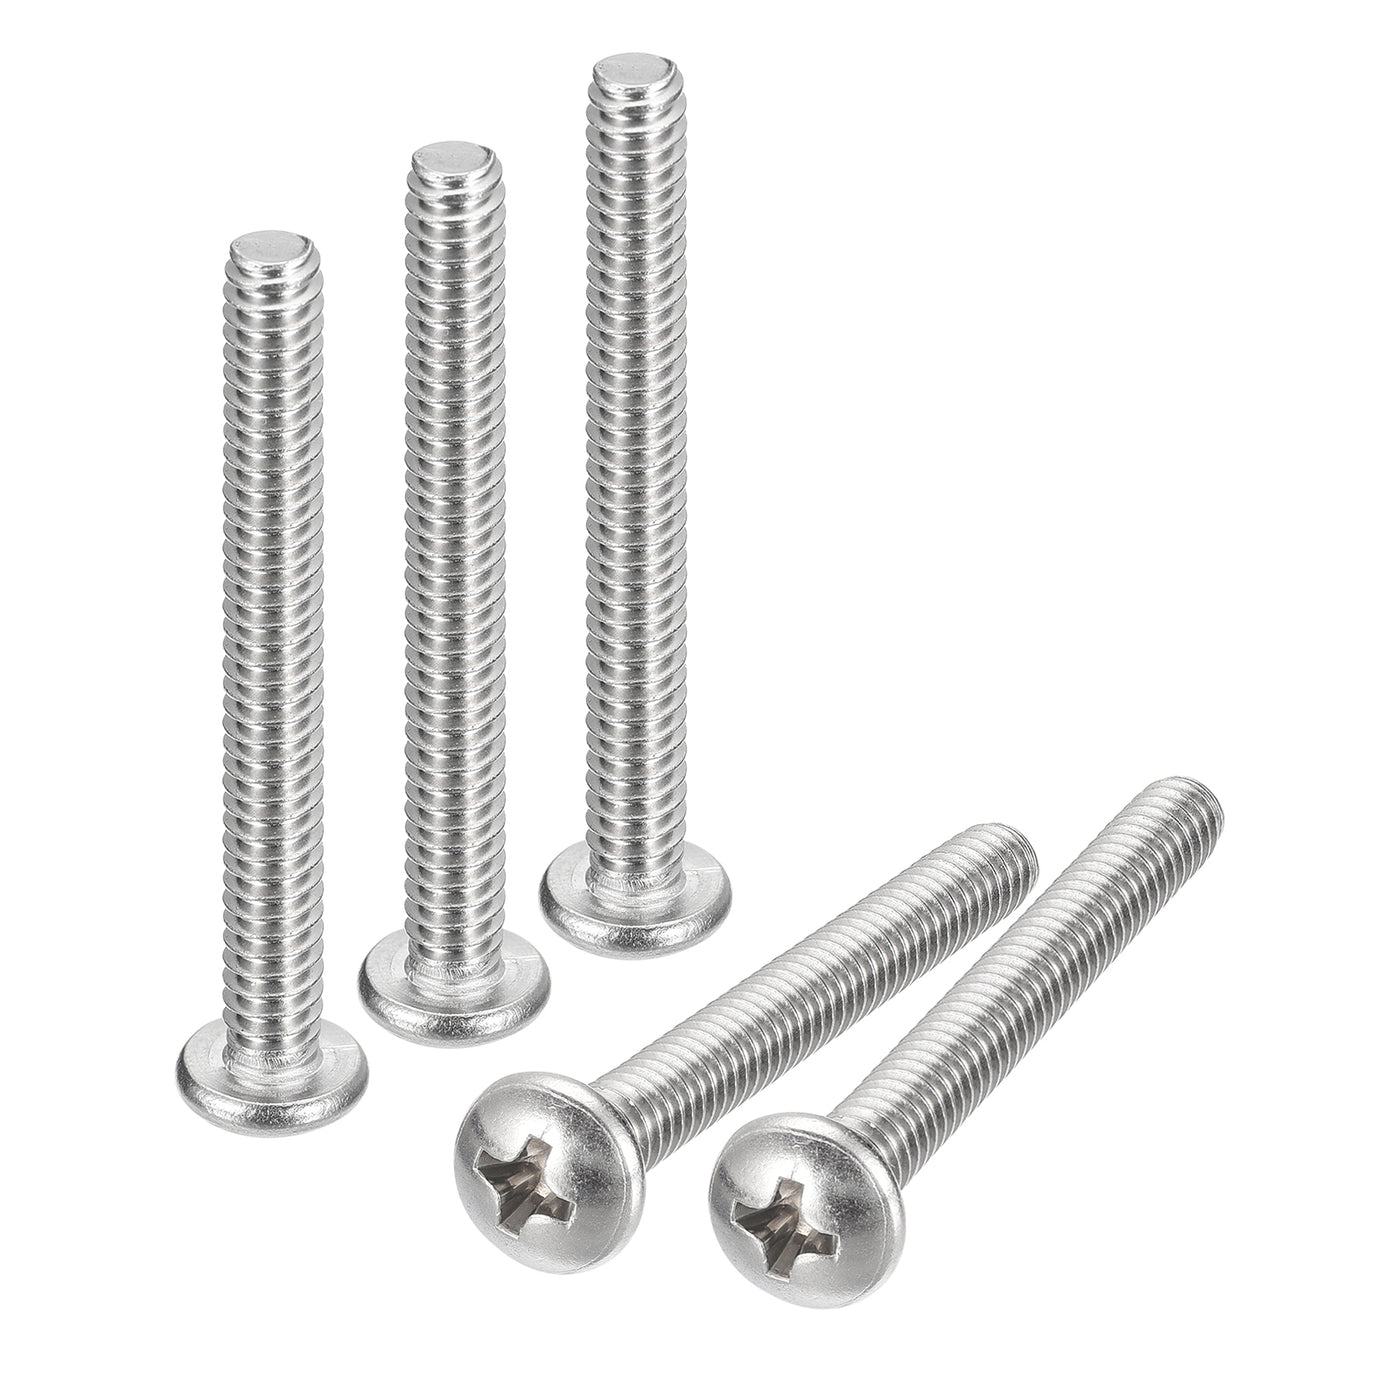 uxcell Uxcell #10-24x1-3/4" Pan Head Machine Screws, Stainless Steel 18-8 Screw, Pack of 20